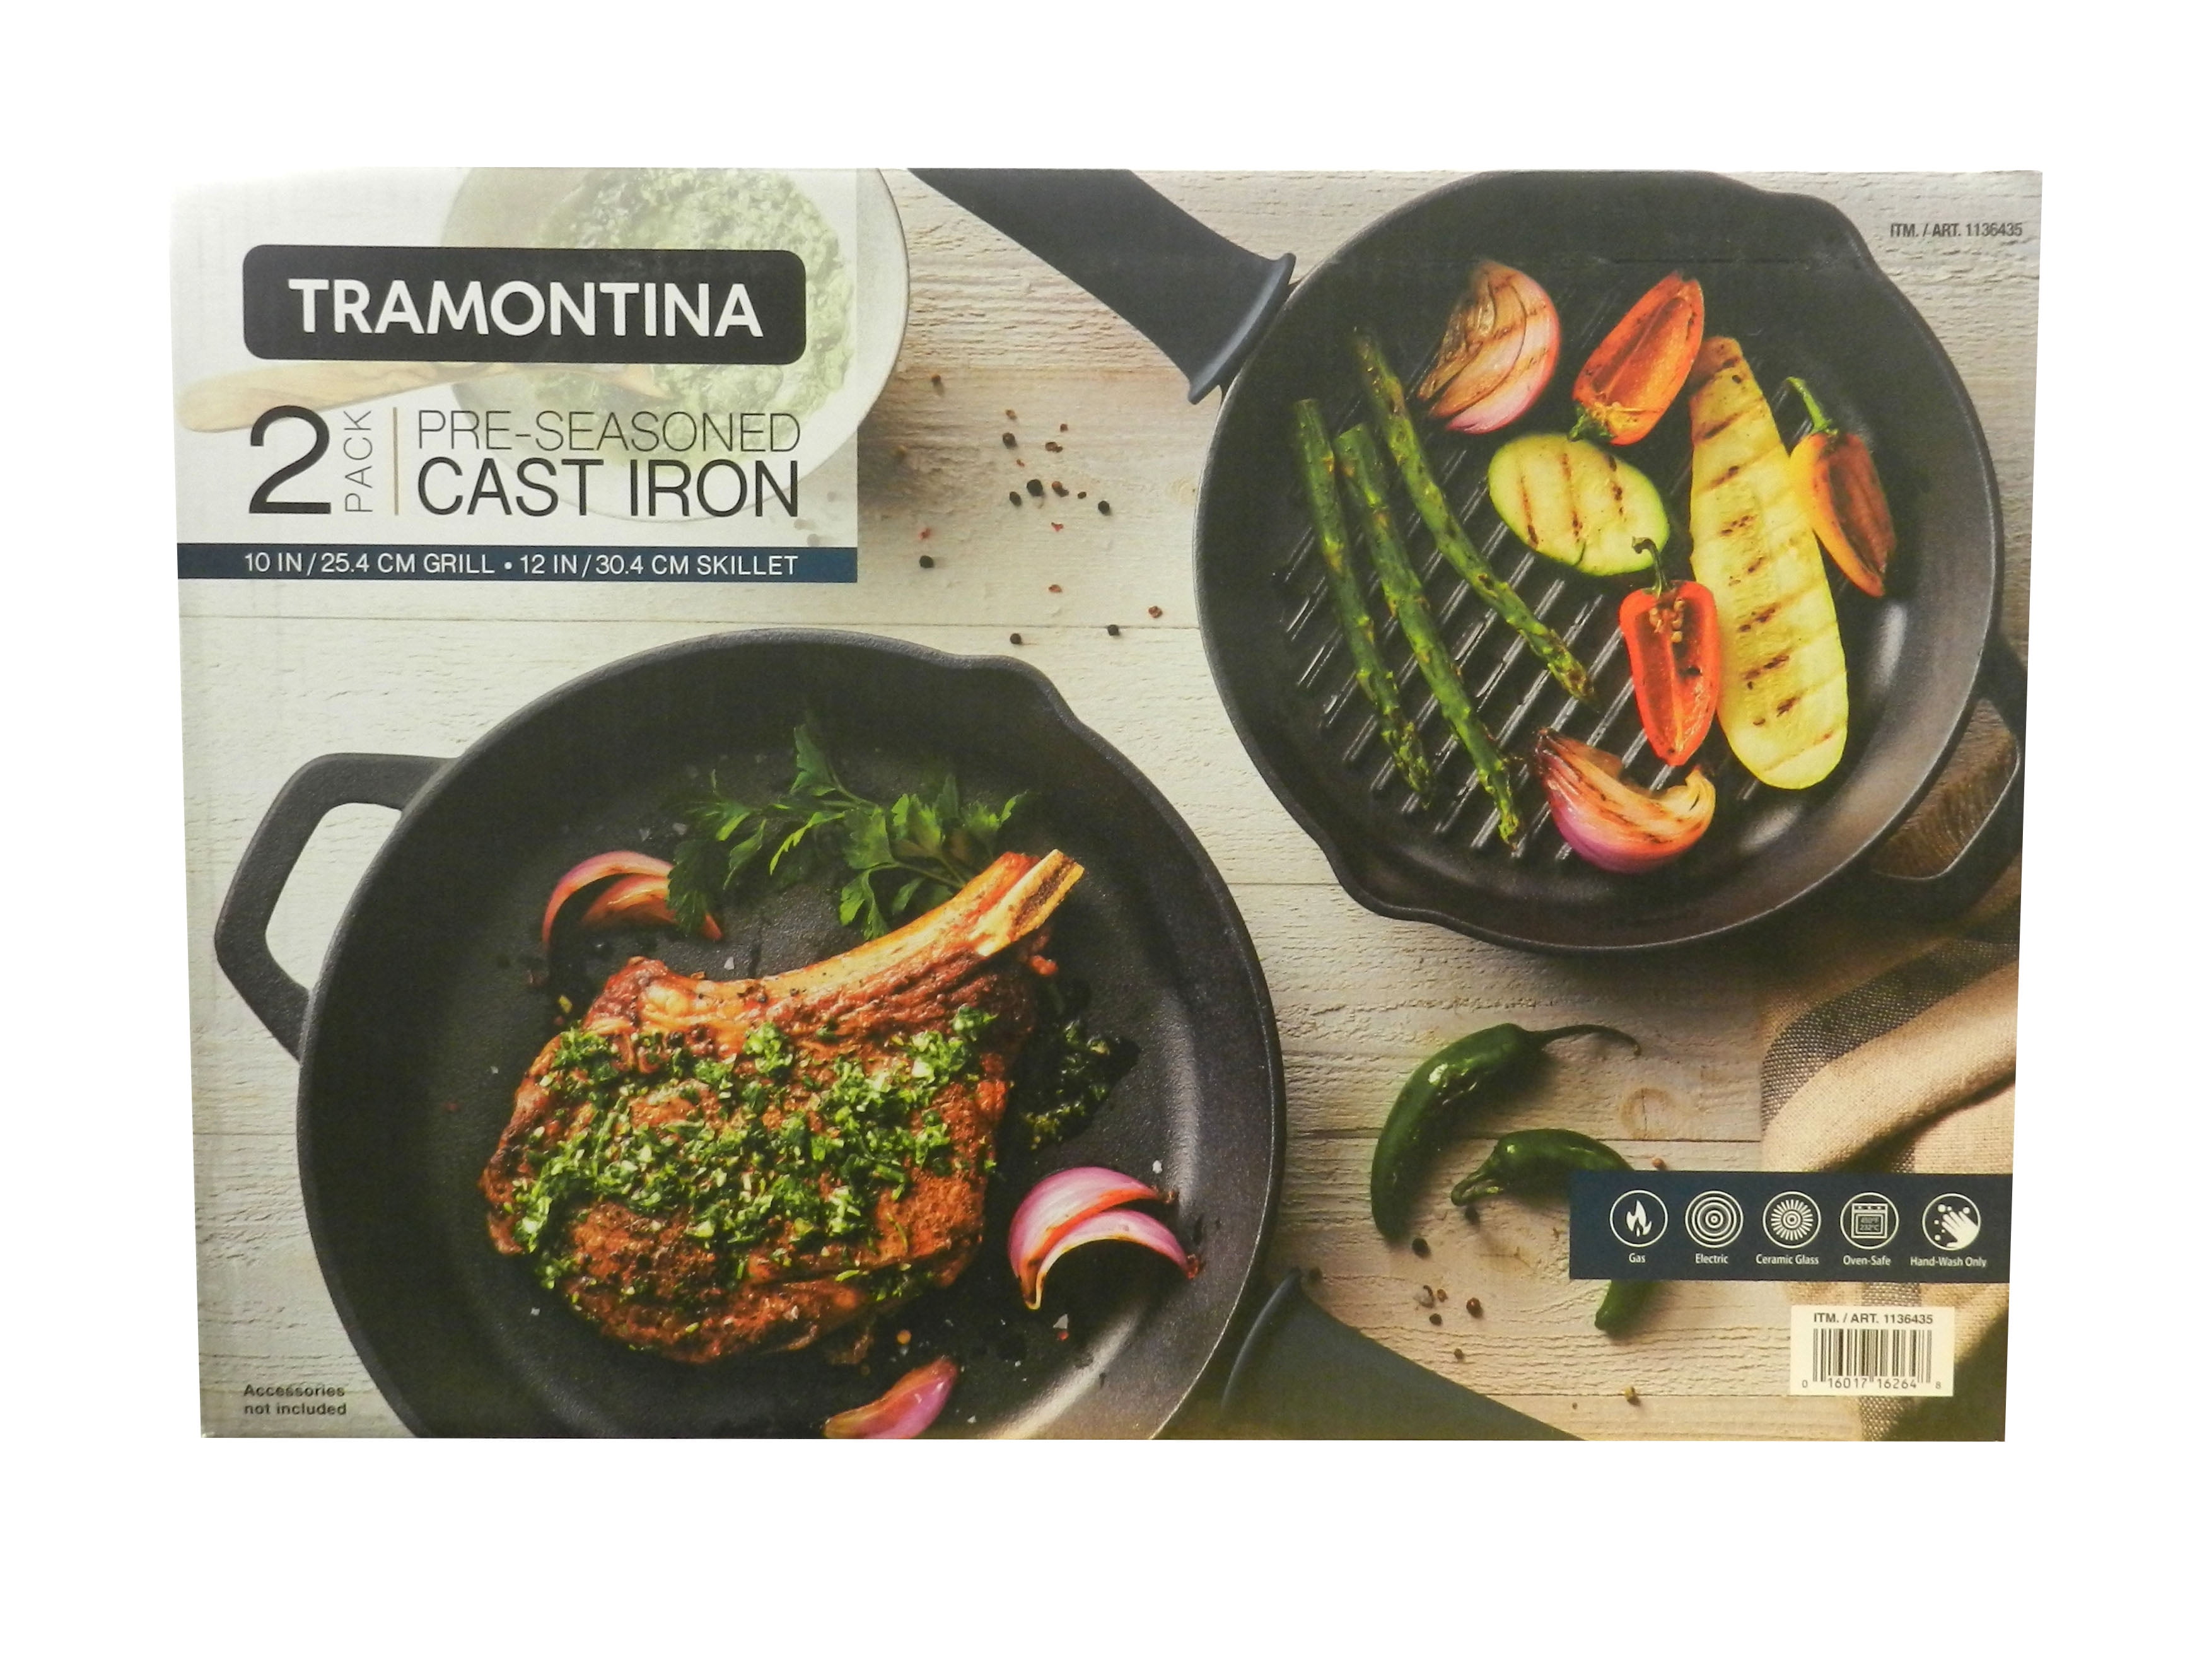 Tramontina Pre-Seasoned Cast Iron Grill Pan + Skillet 10 in Grill 12 in  Skillet